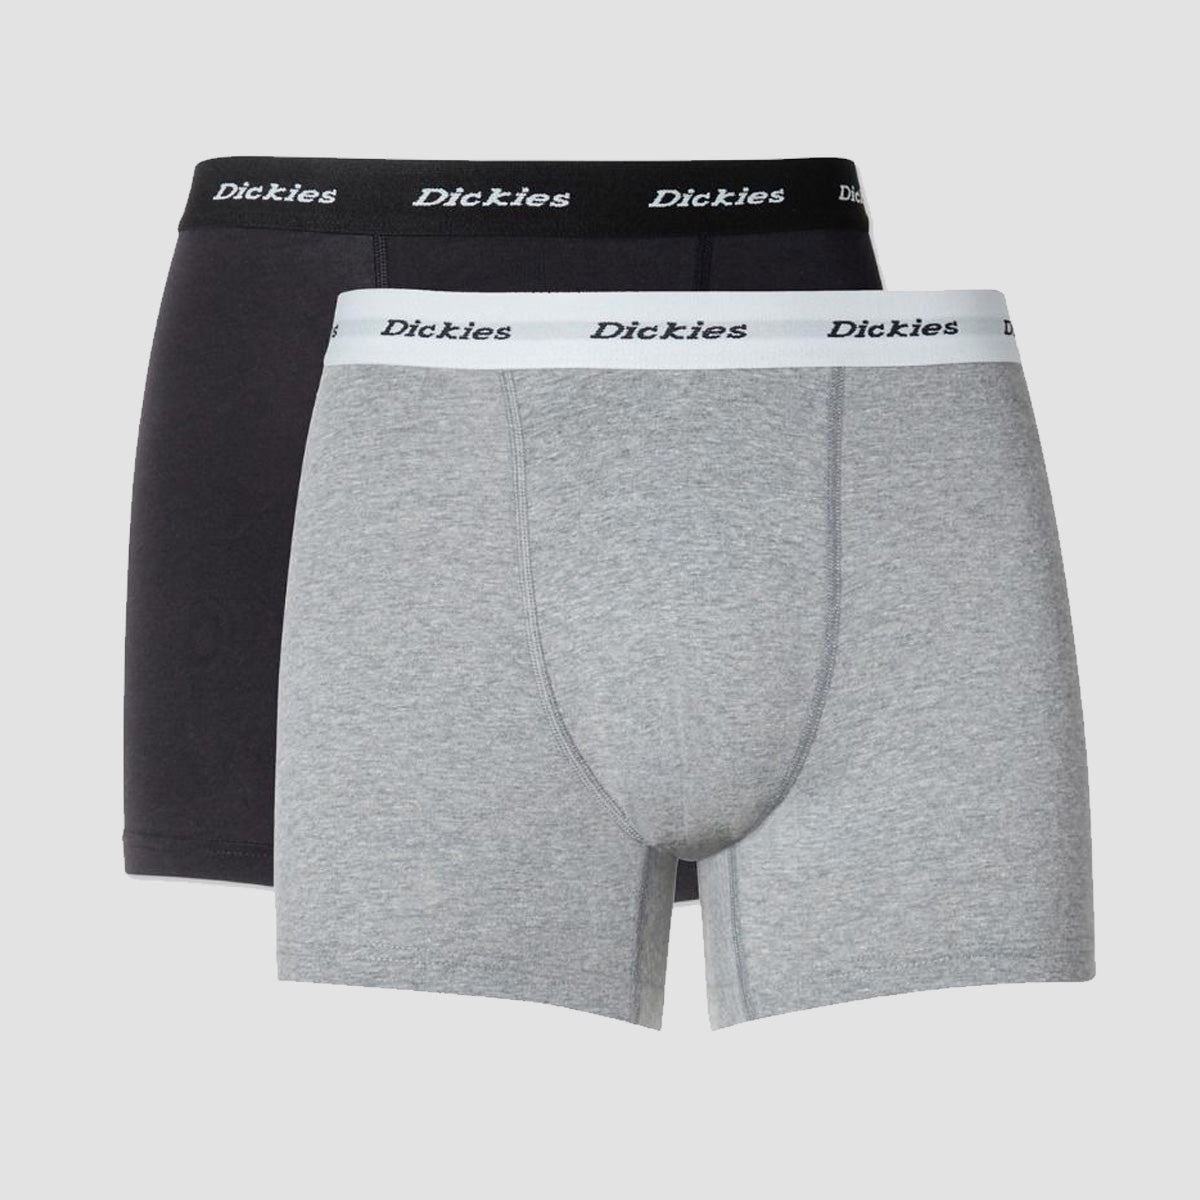 Dickies Trunk Boxer Shorts 2 Pack Assorted Colour